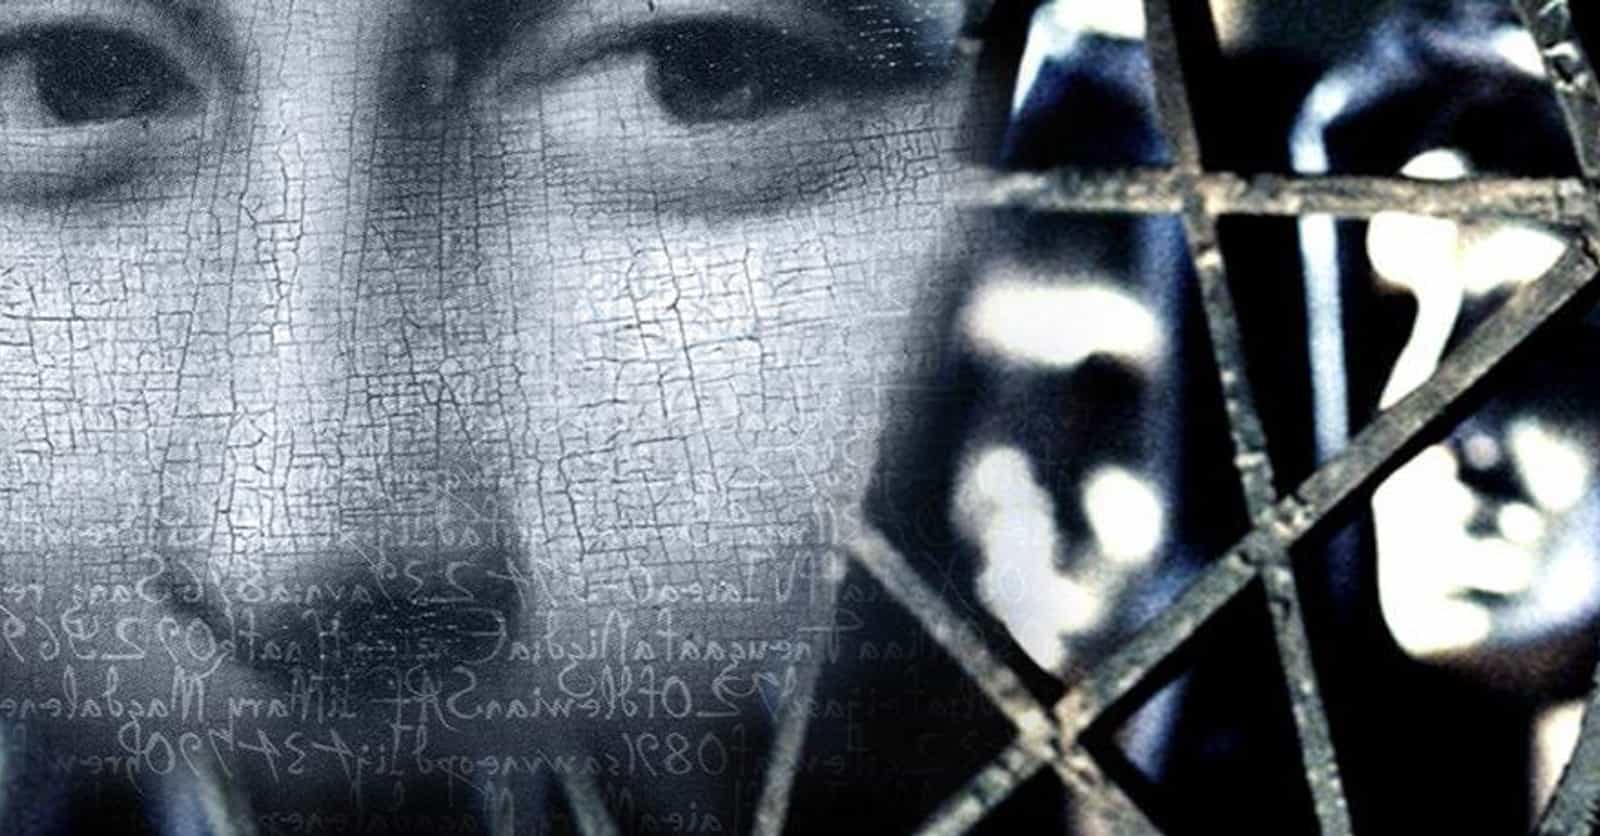 The Real Inspiration For The Da Vinci Code Wasn't Jesus – It Was A Notorious Hoax From The 1950s